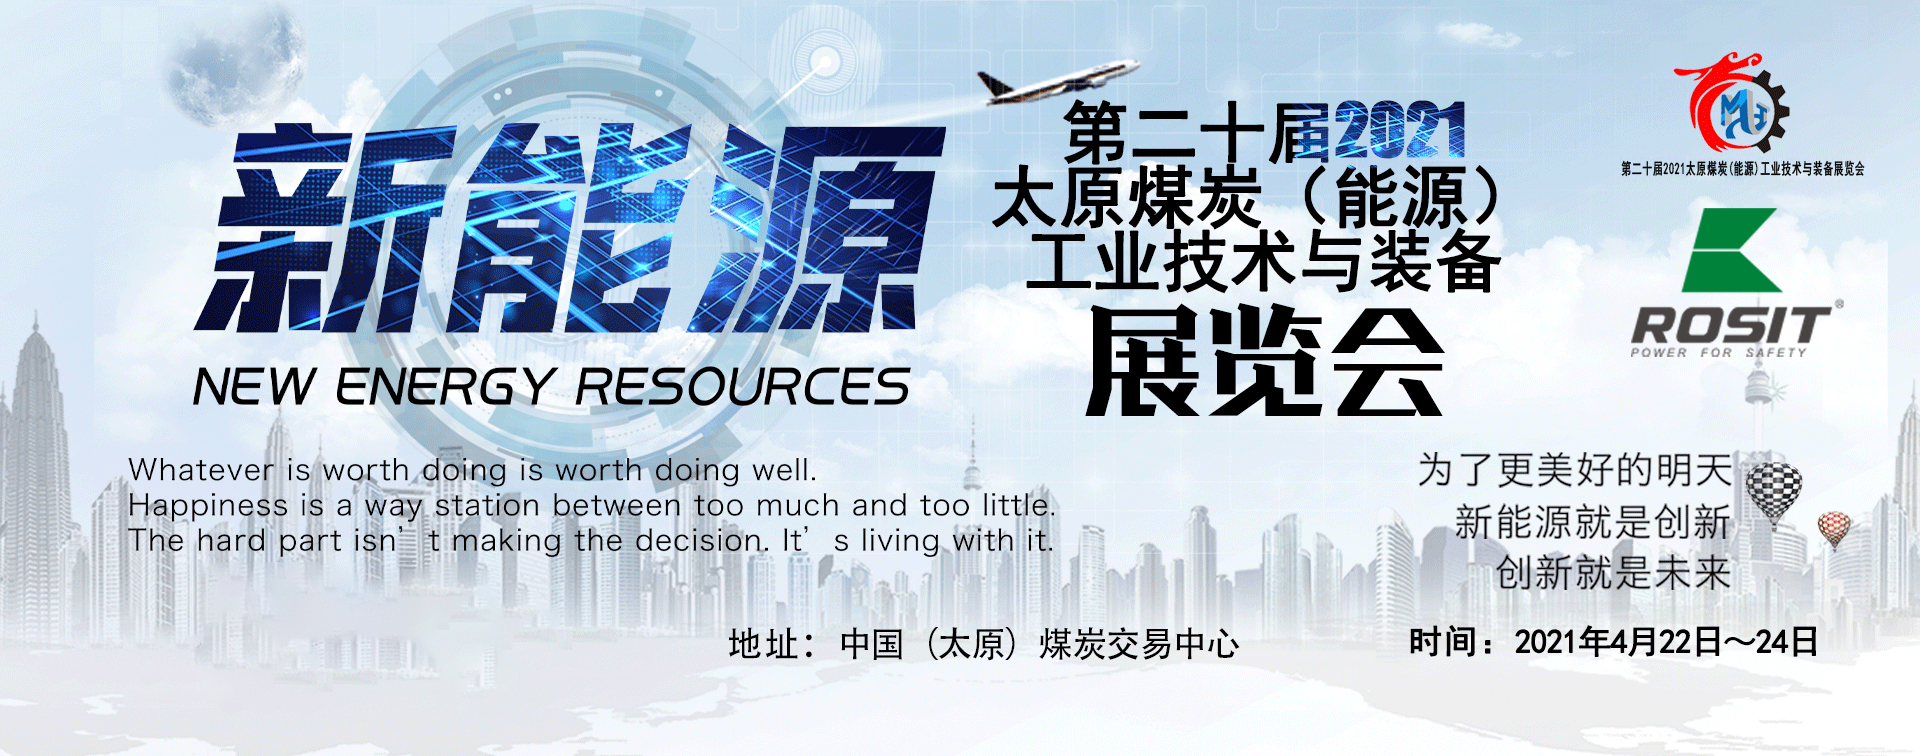 The 20th TaiYuan (2021) Coal (Energy Resources)Technology & Equipment Exhibition 